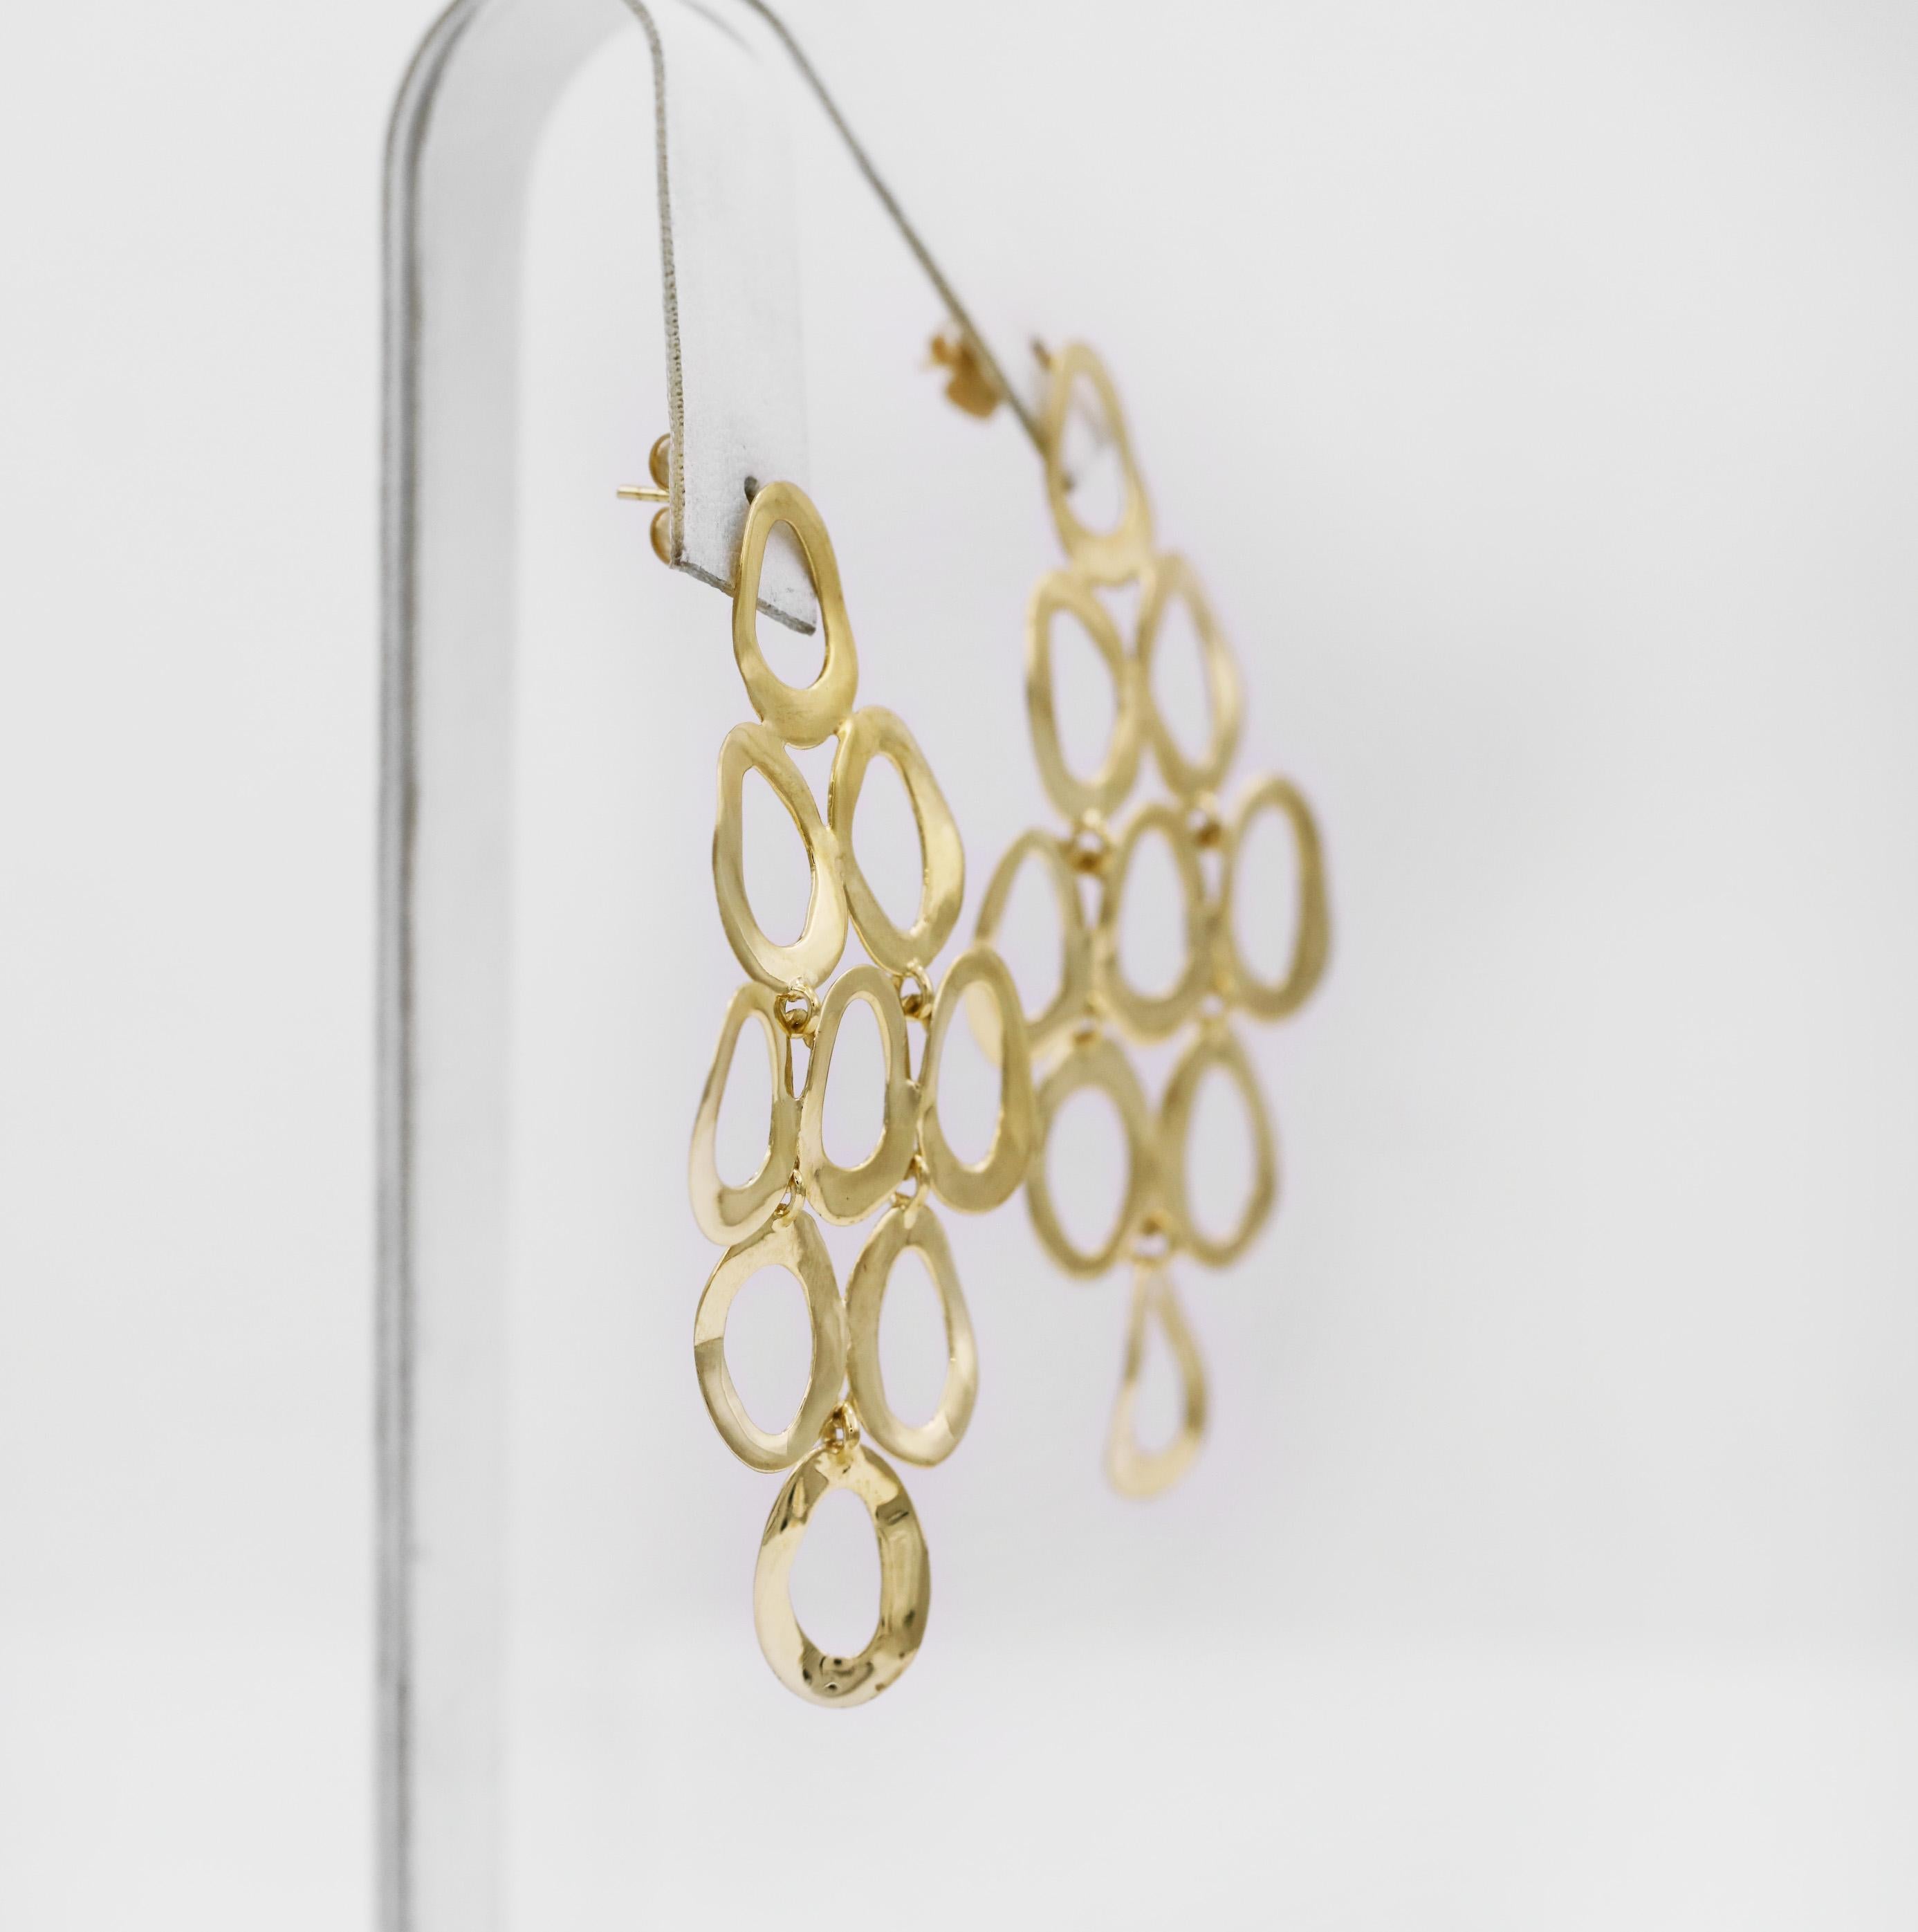 IPPOLITA
Classico Collection
STYLE# GE020
Nine open ovals, each sculpted and cast by hand
18K gold
assembled with a hinged construction to form a cascading earring of striking beauty
Approx. measurements: Length: 2.50